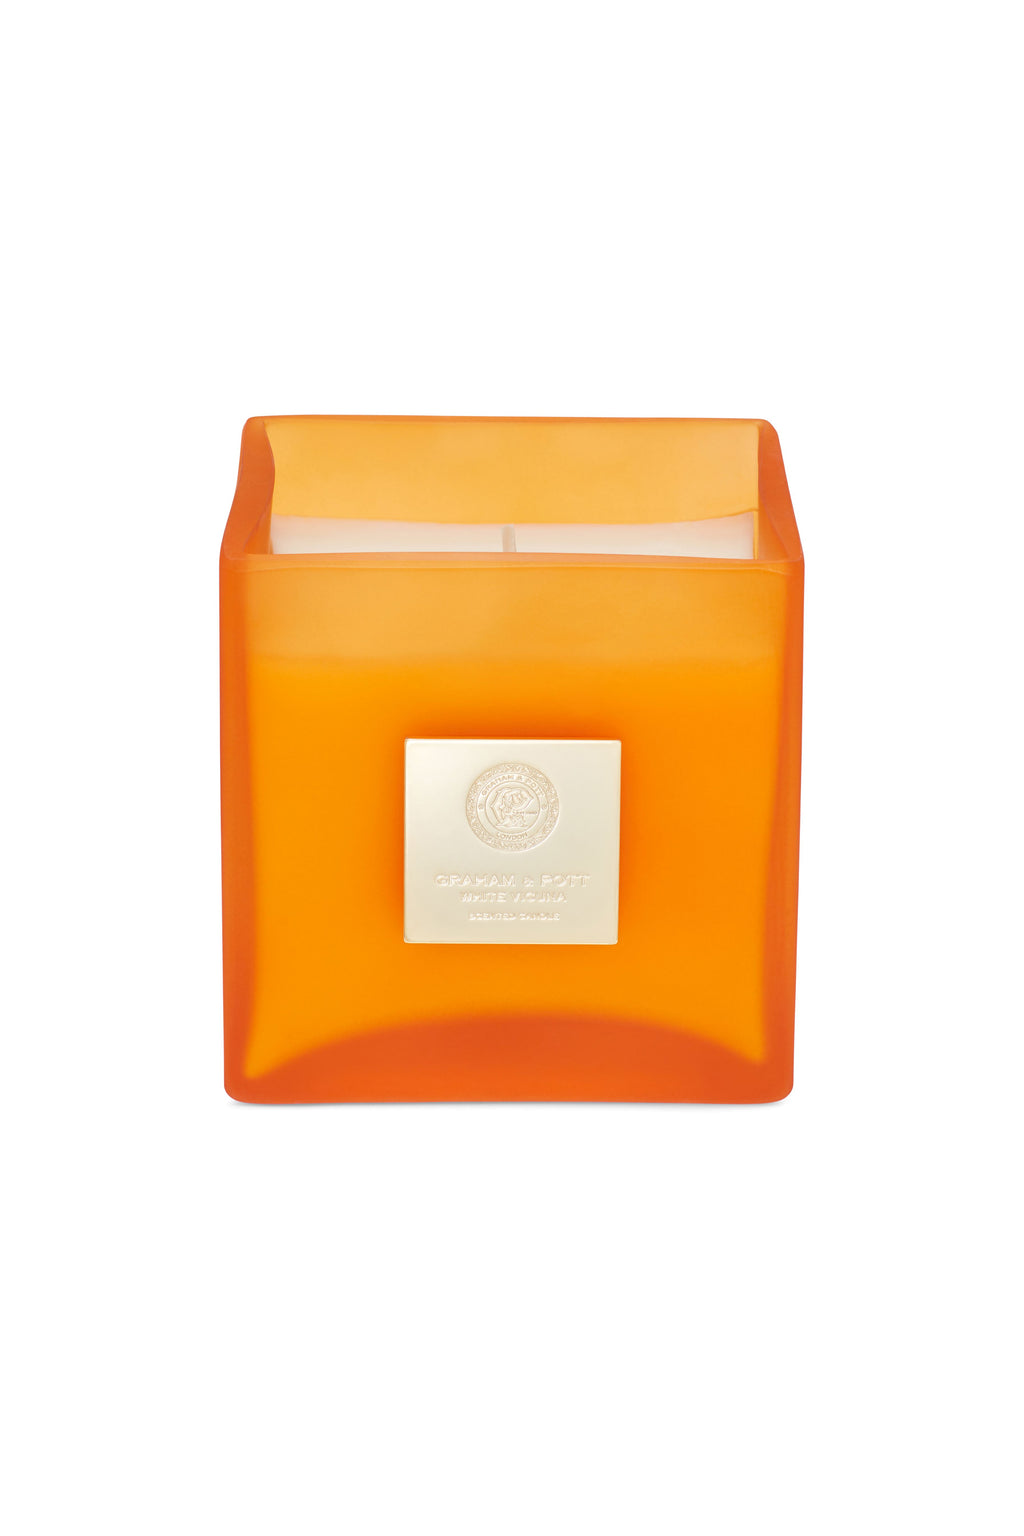 WHITE VICUNA Scented Candle - GRAHAM & POTT